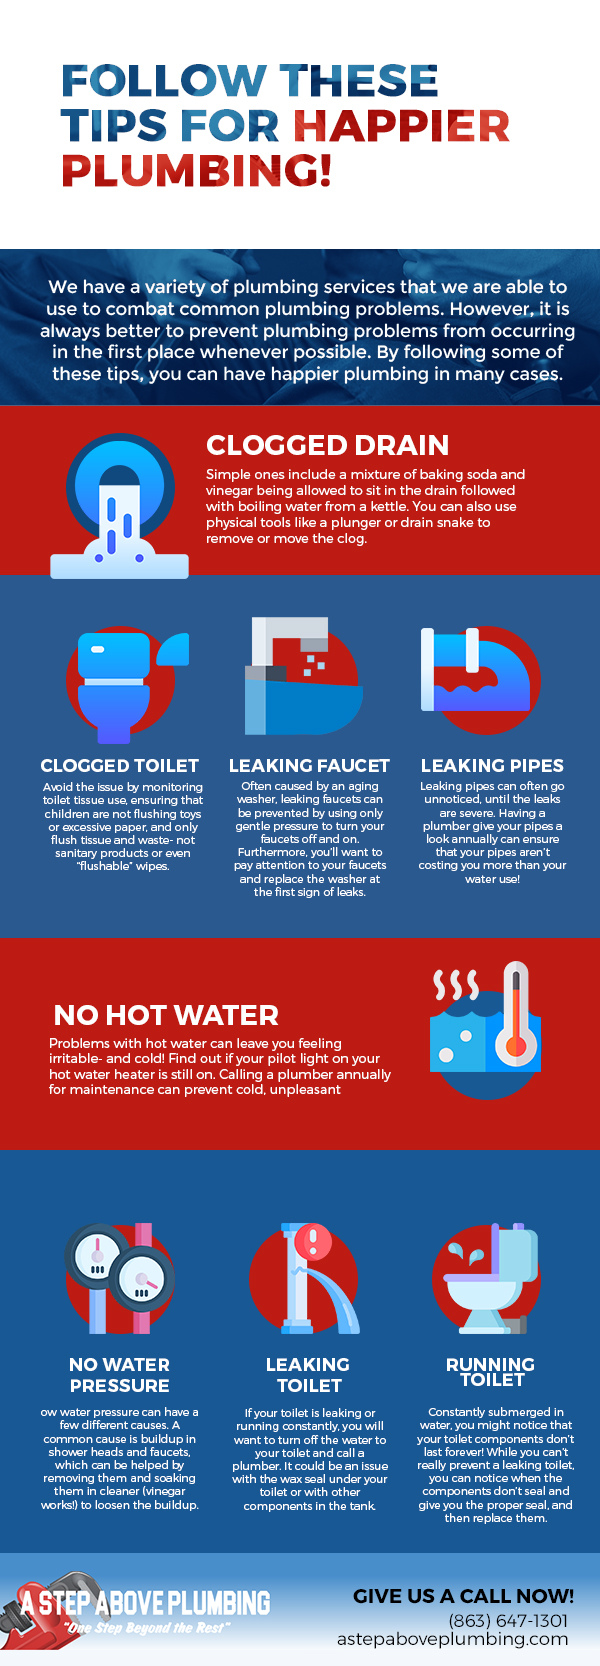 Follow These Tips for Happier Plumbing! [infographic]